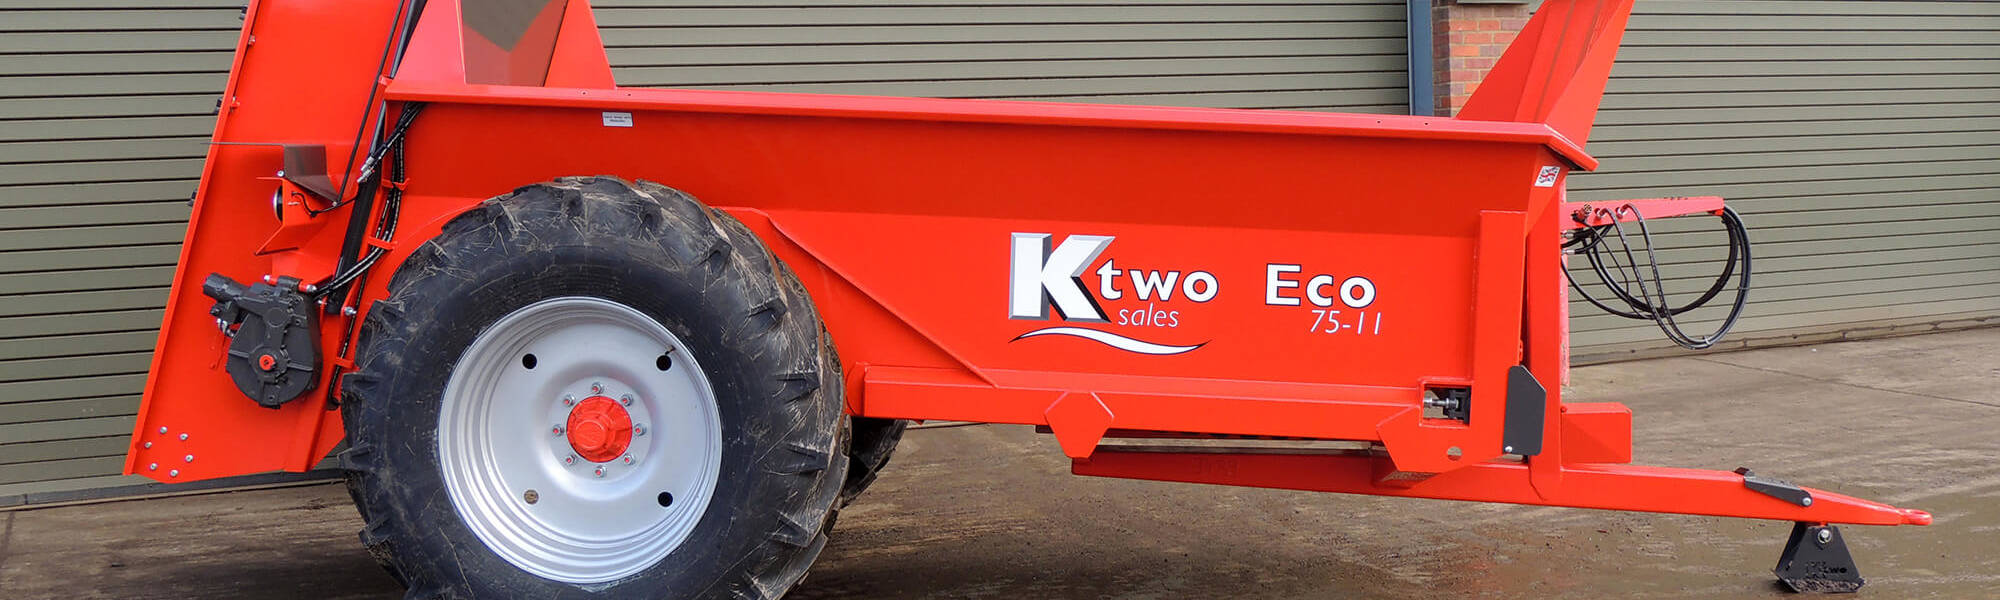 Eco Muck Spreaders - ktwo